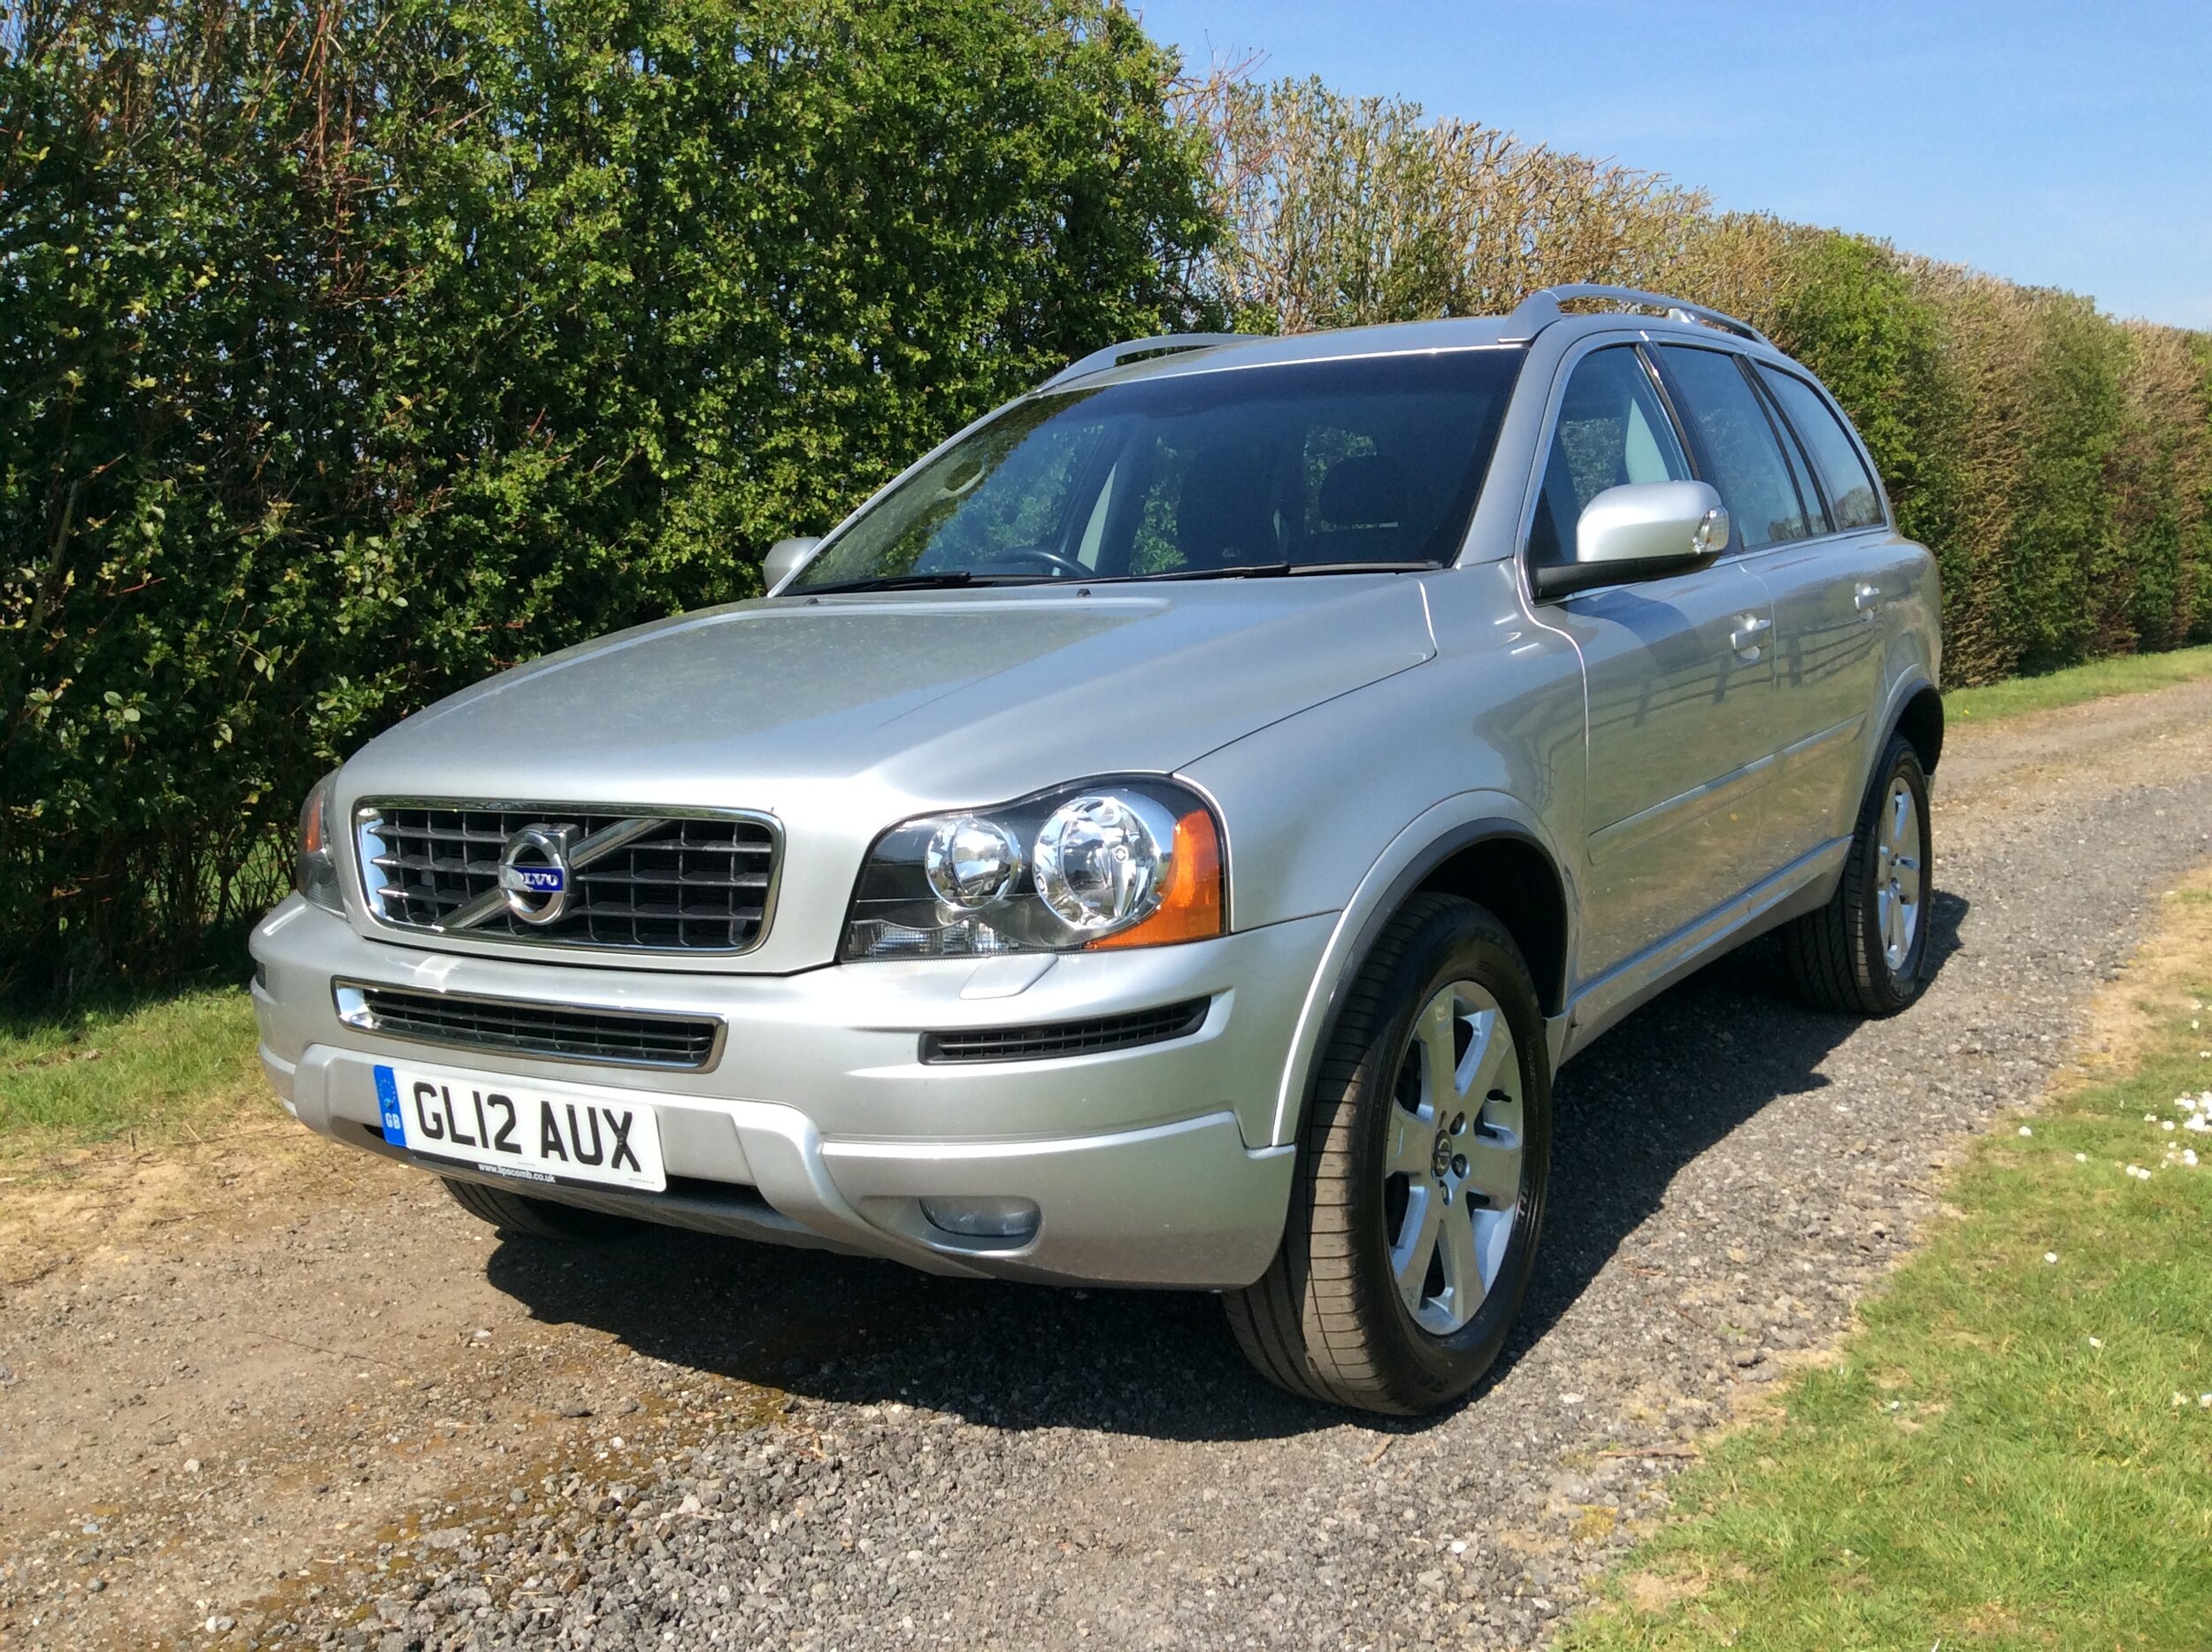 Volvo XC90 D5 SE - one owner